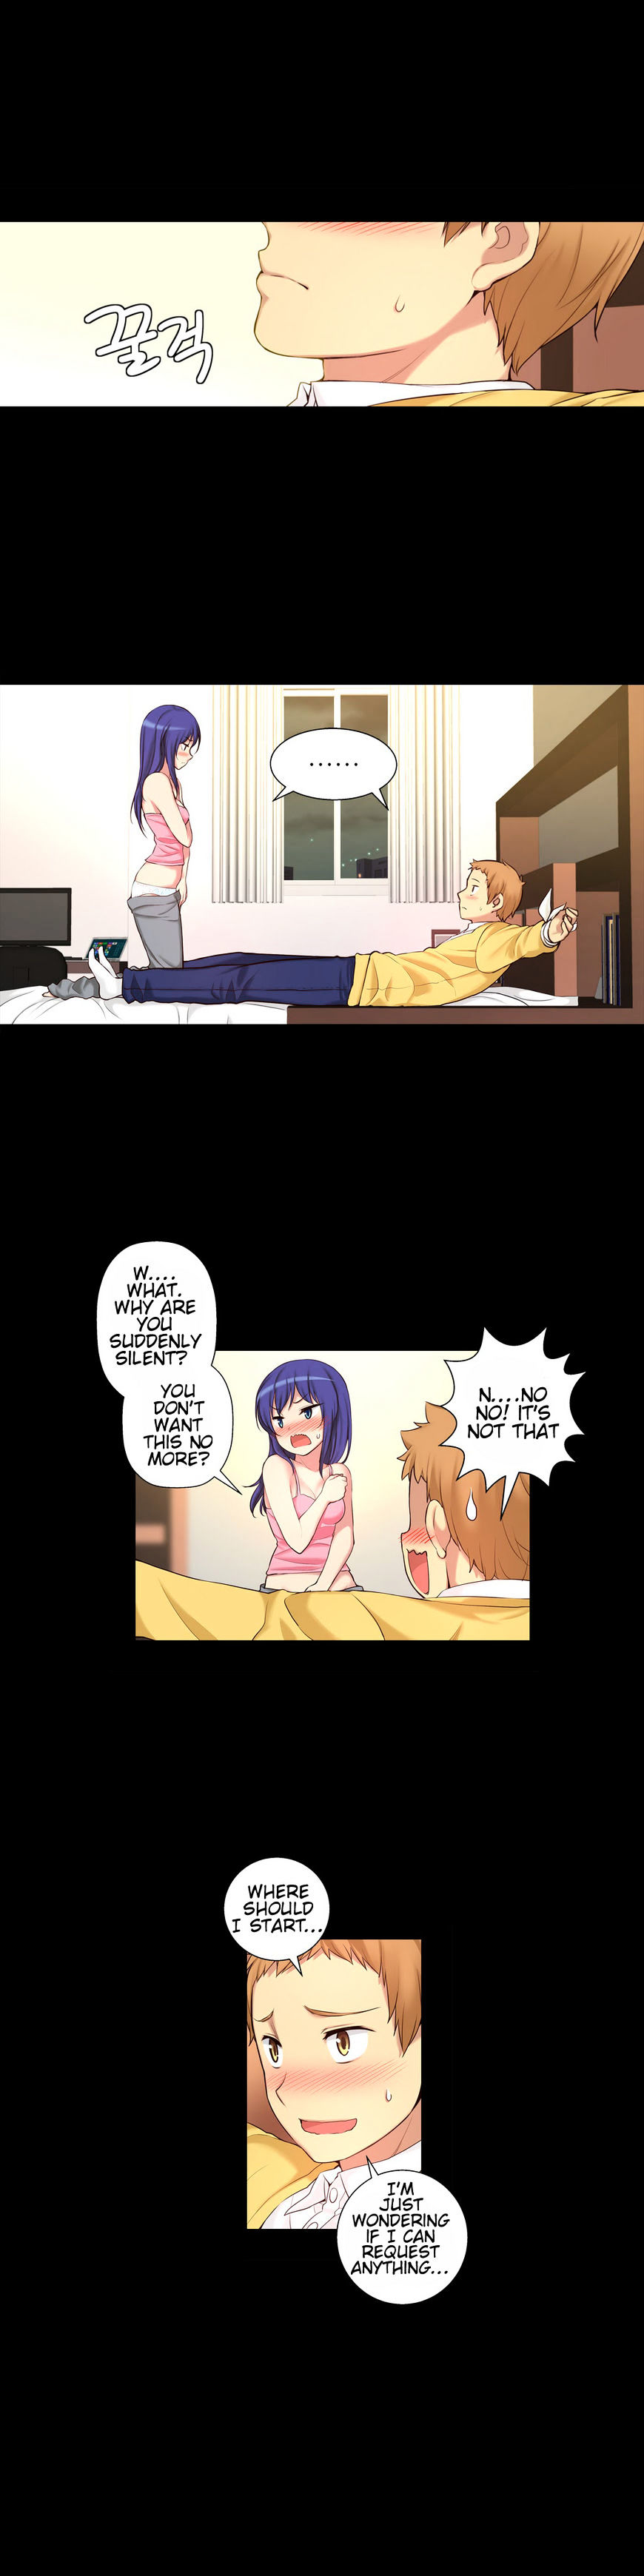 She Is Young - Page 2